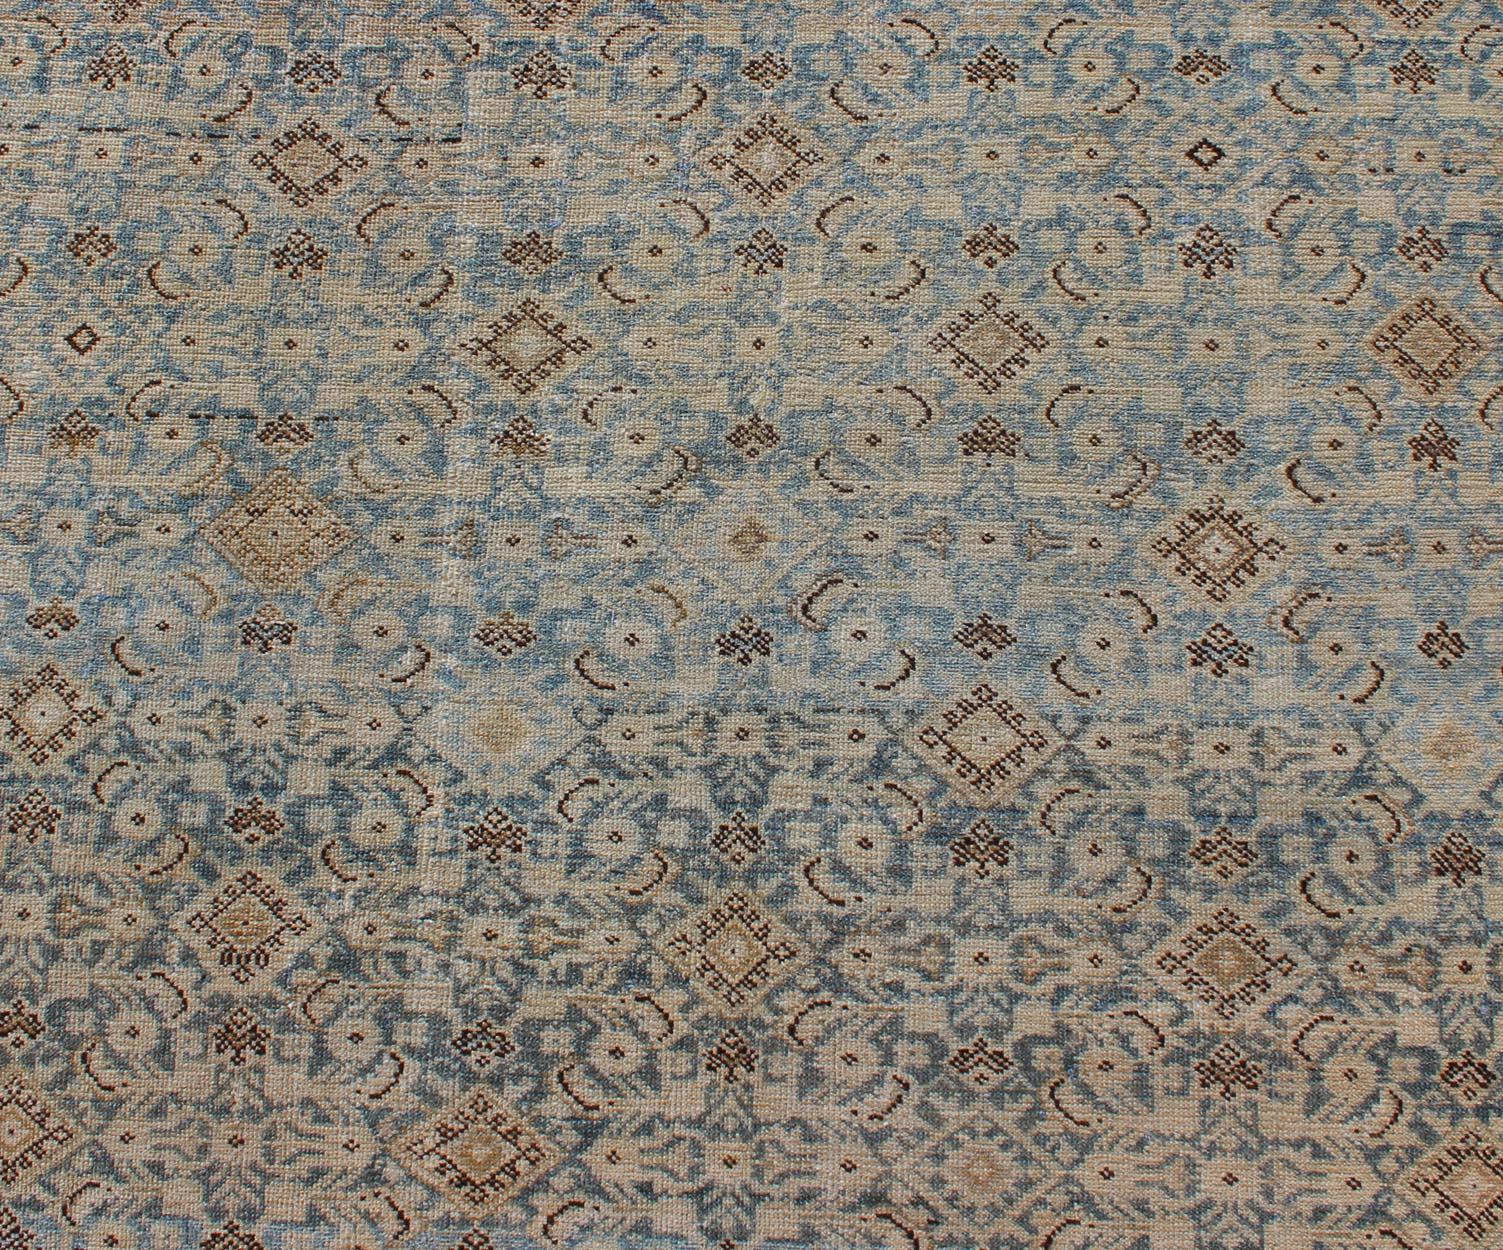 Muted Light Blue Persian Gallery Malayer Rug with Sub-Geometric Design 2